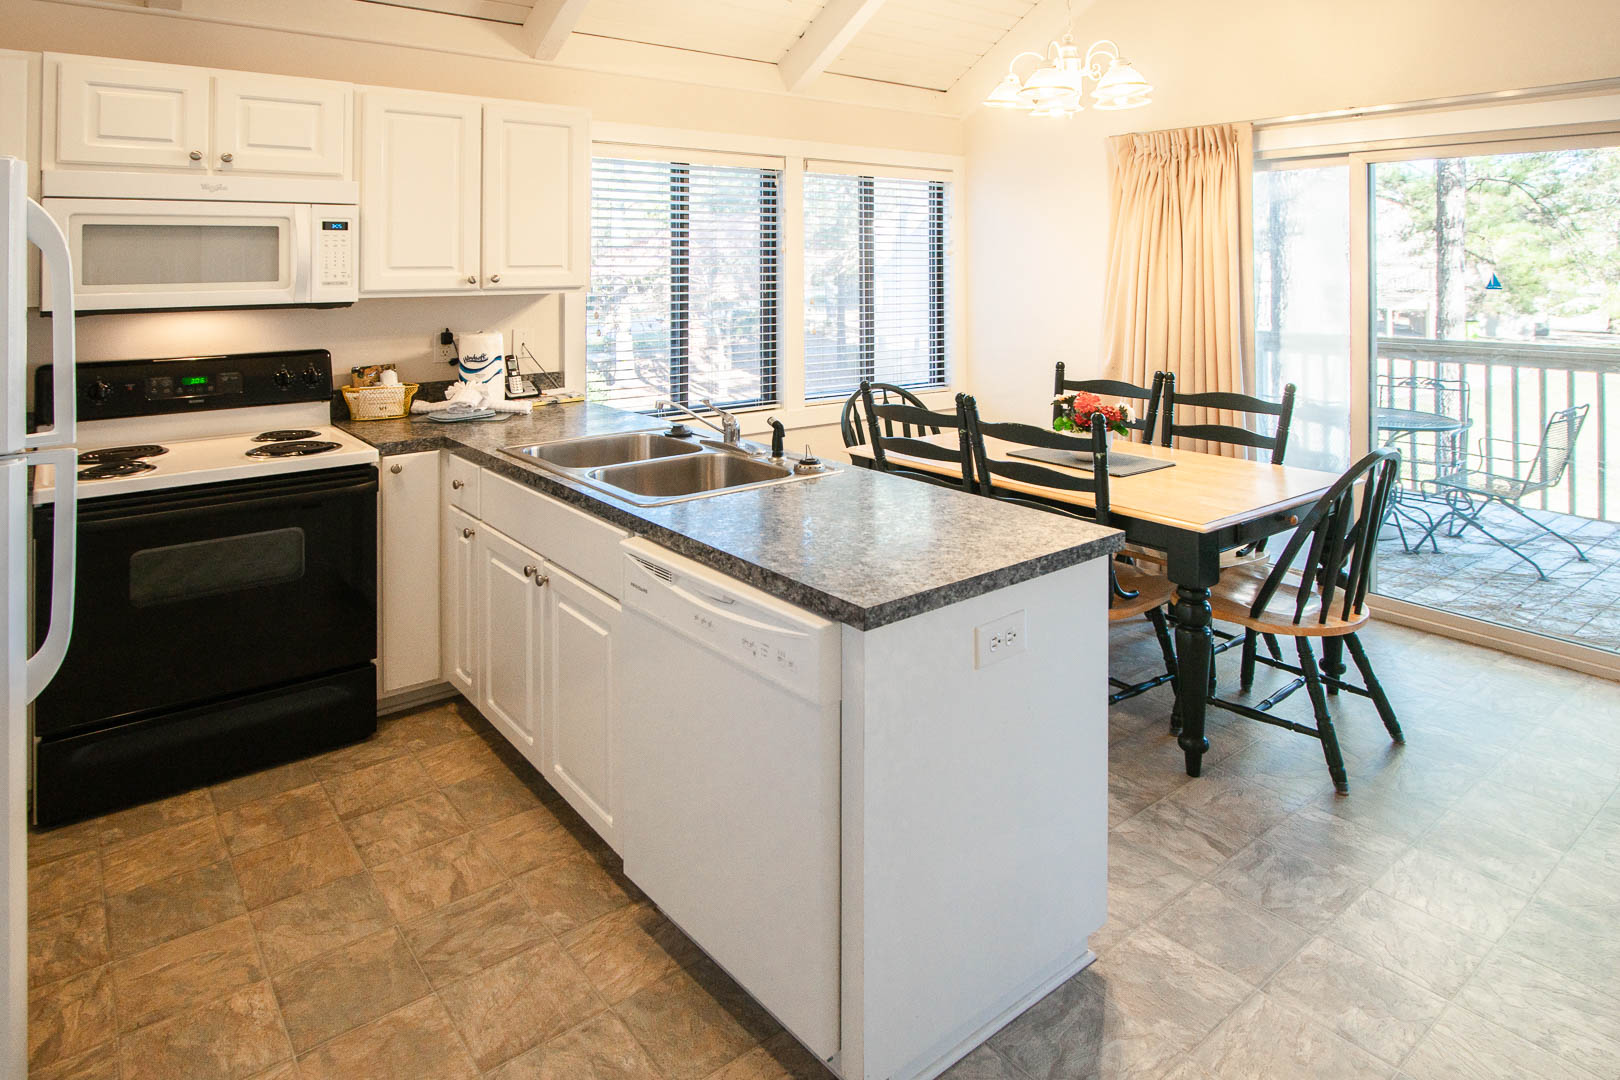 A fully equipped kitchen at VRI's Waterwood Townhomes in New Bern, North Carolina.